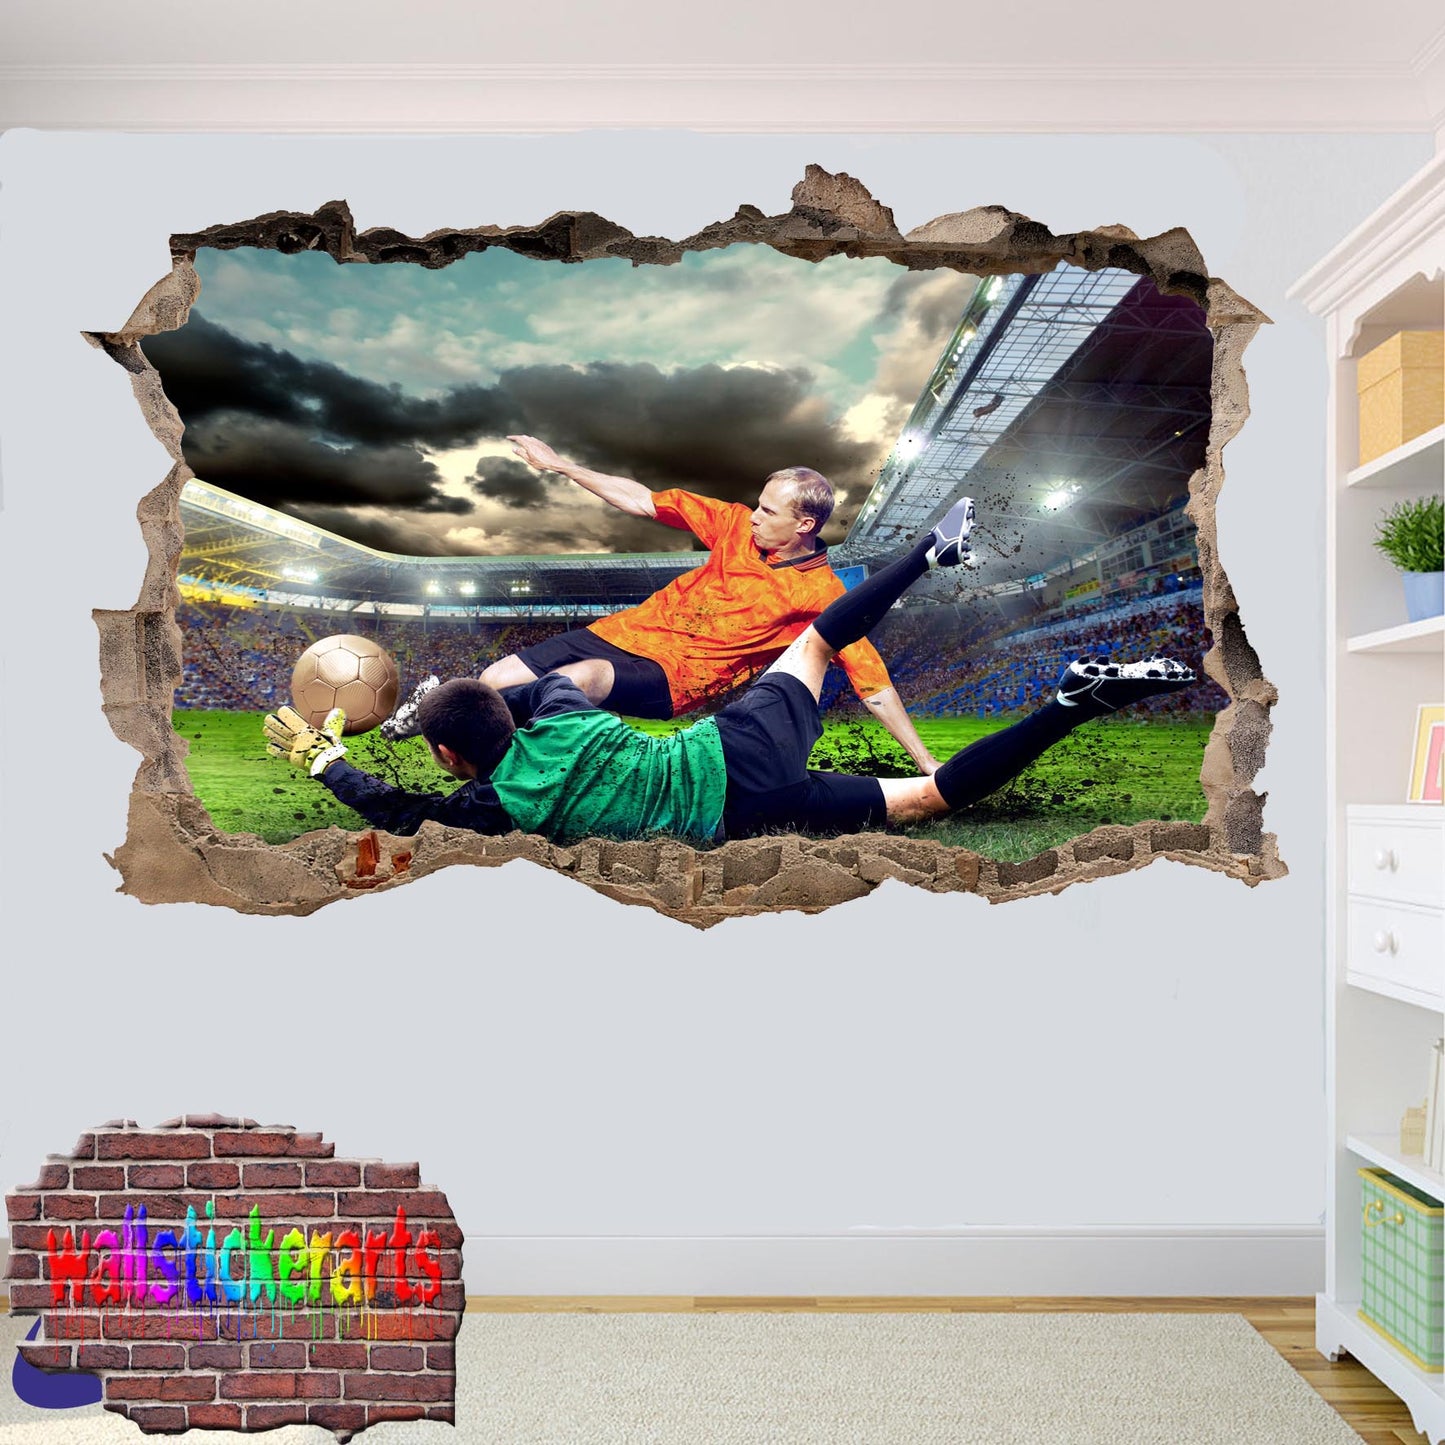 Football Players on Pitch Sports 3d Smashed Effect Wall Sticker Room Office Nursery Shop Decoration Decal Mural YO5